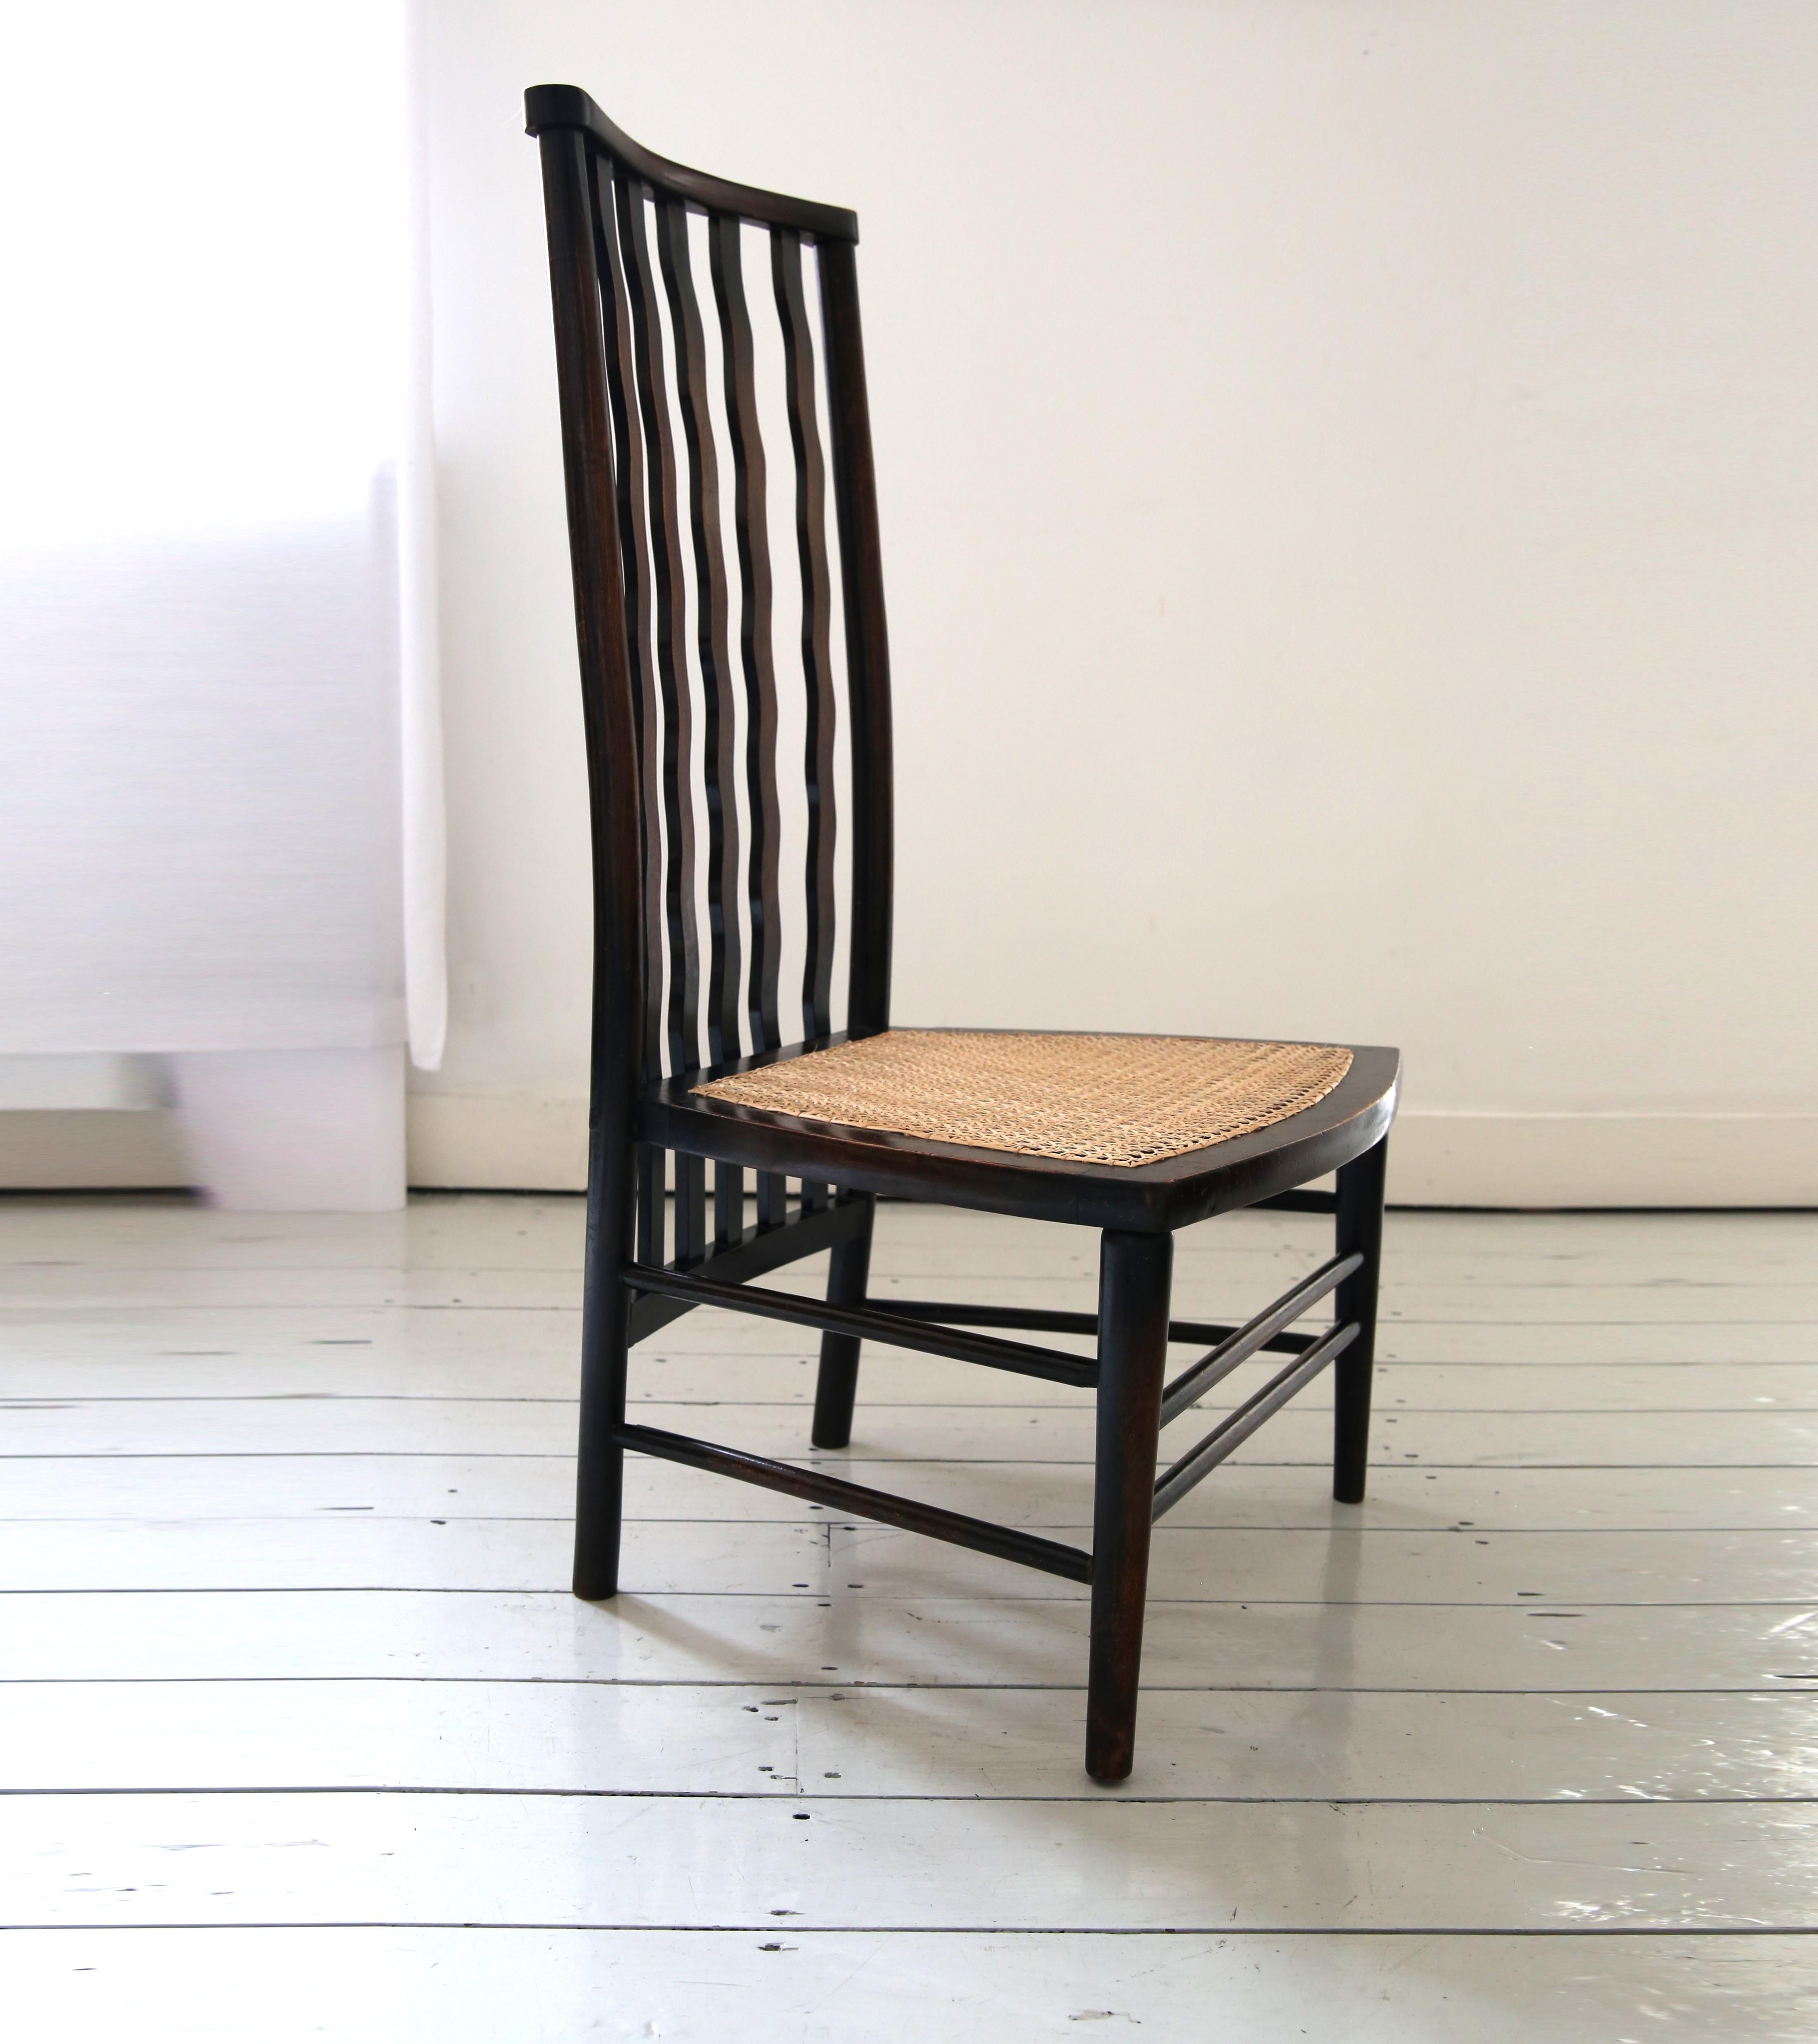 Morris & Co Lath back Chair for Liberty with a cane seat 2